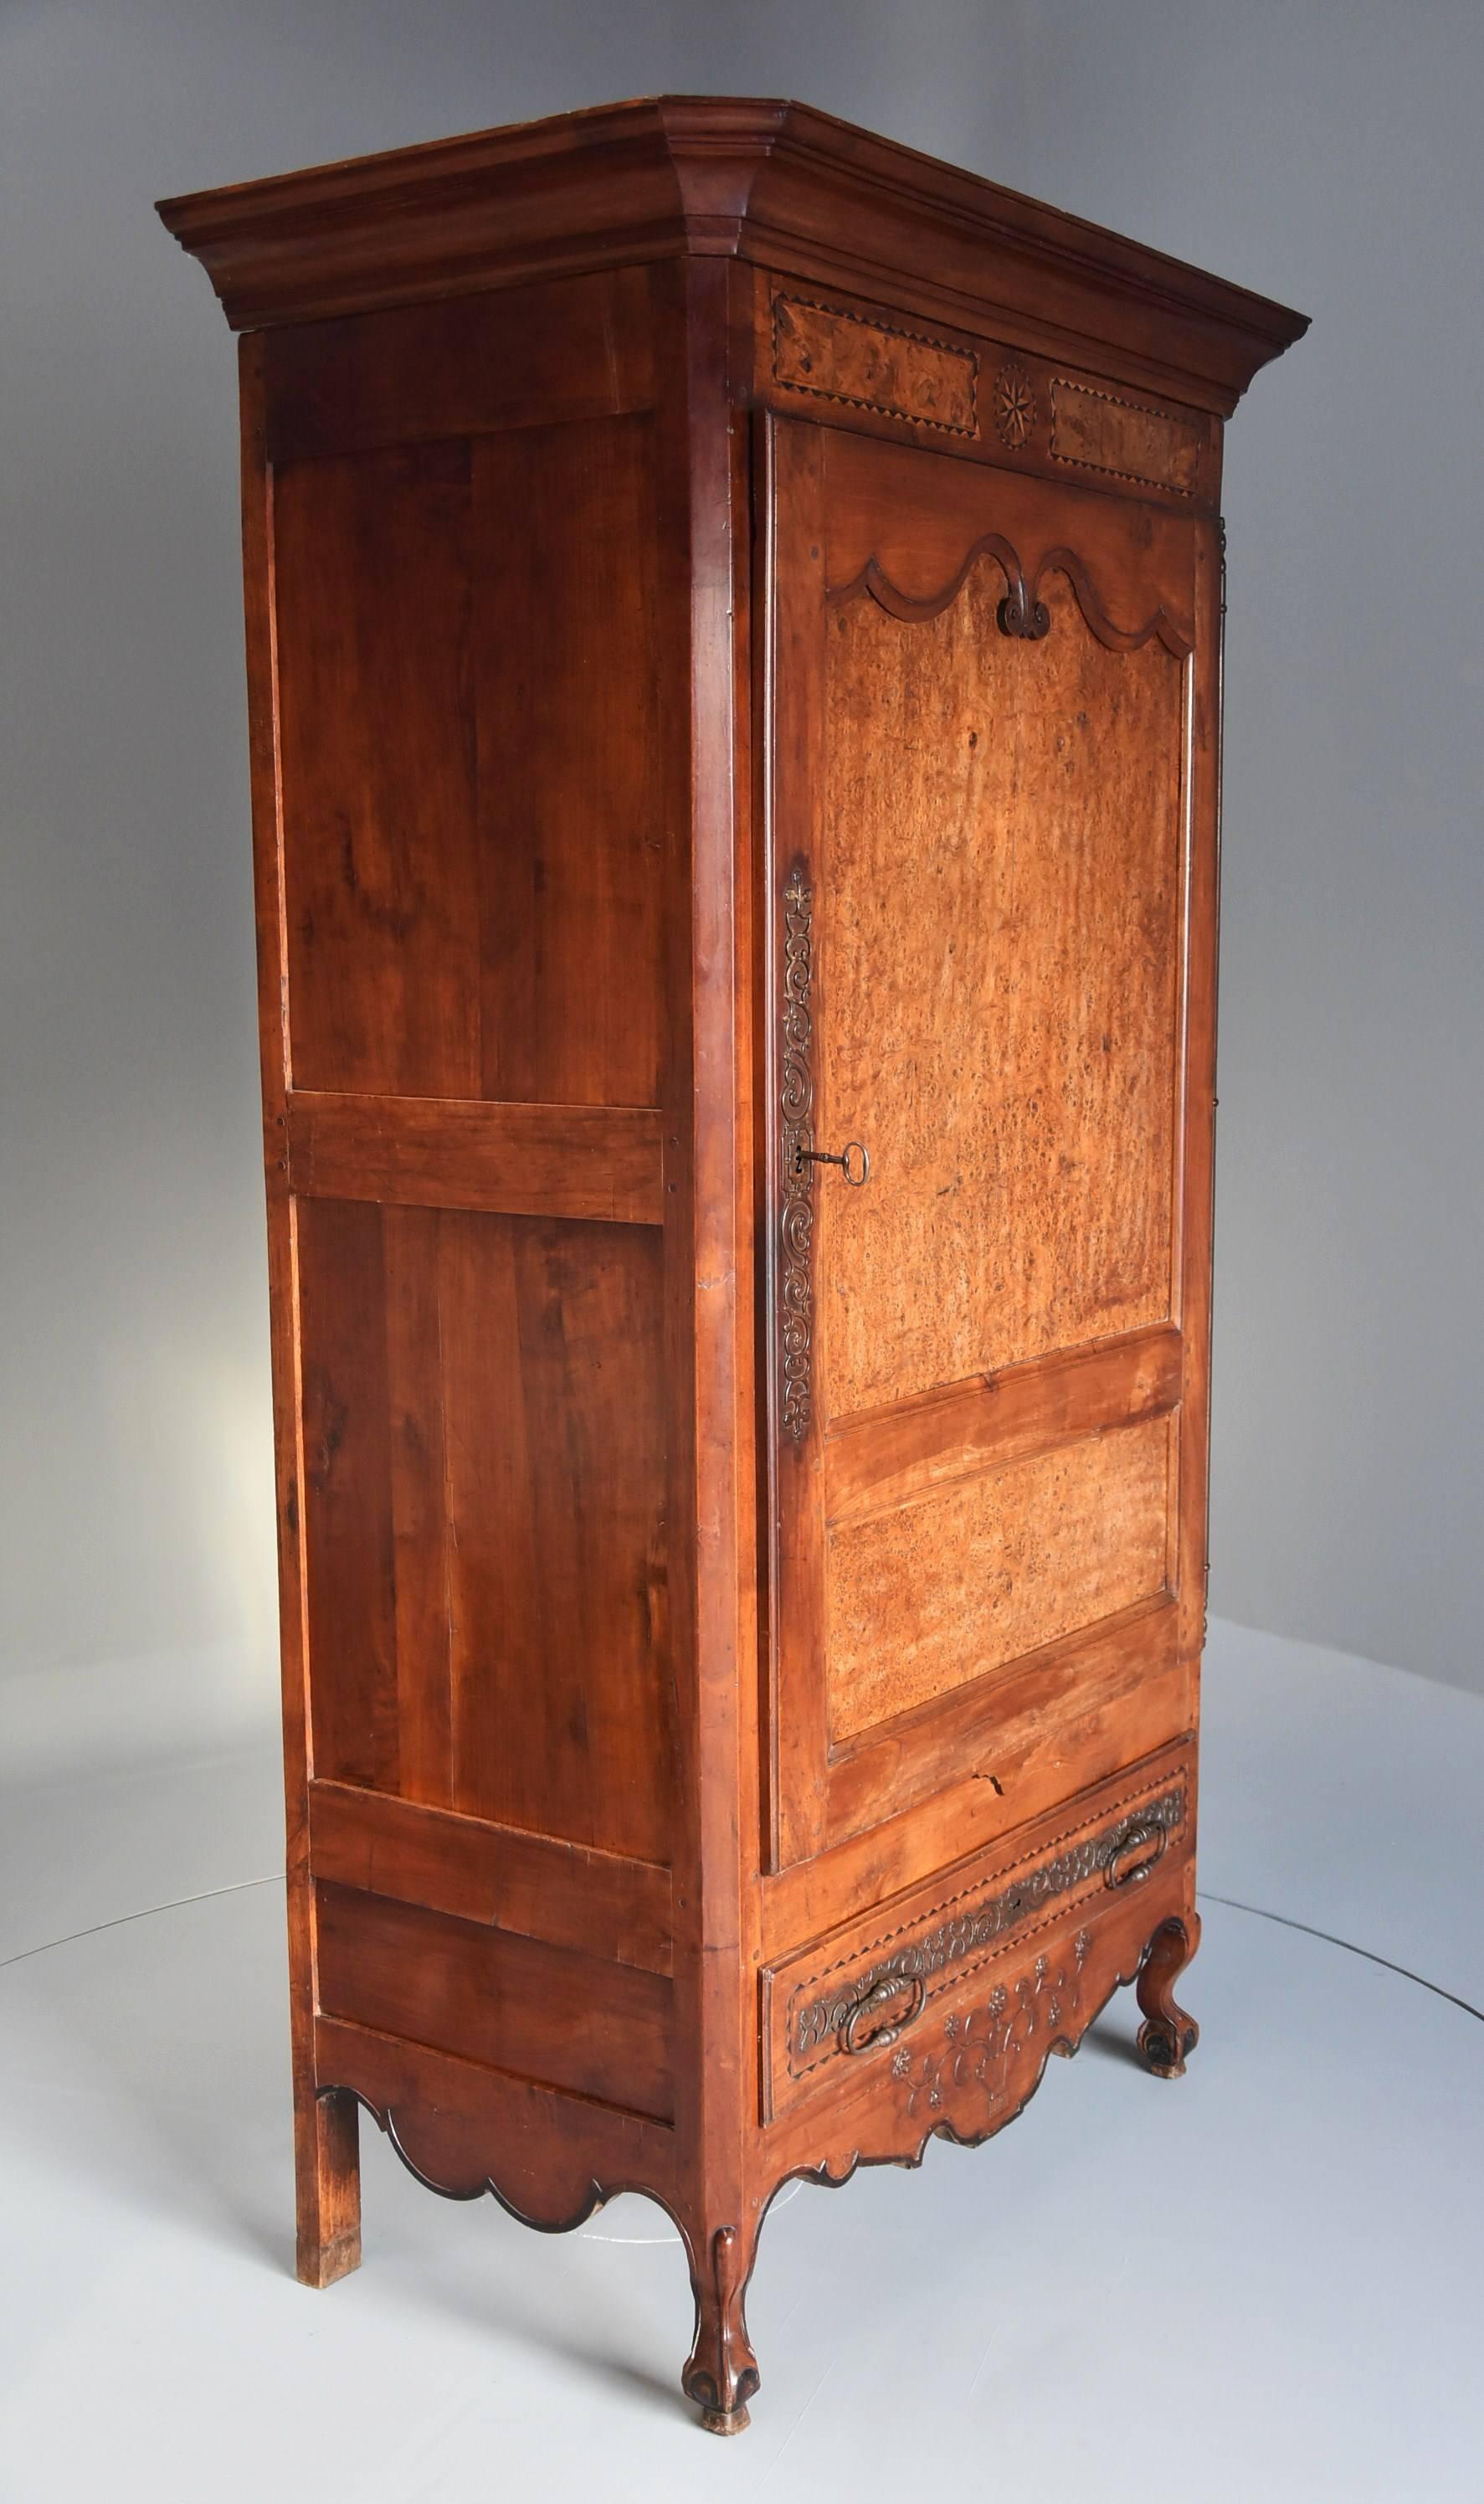 A superb late 18th century Louis XV fruitwood (cherry) and burr elm bonnetiere of superb patina.

The bonnetiere is a tall wardrobe particularly from the Northern area of France and this is a particularly good example.

This bonnetiere consists